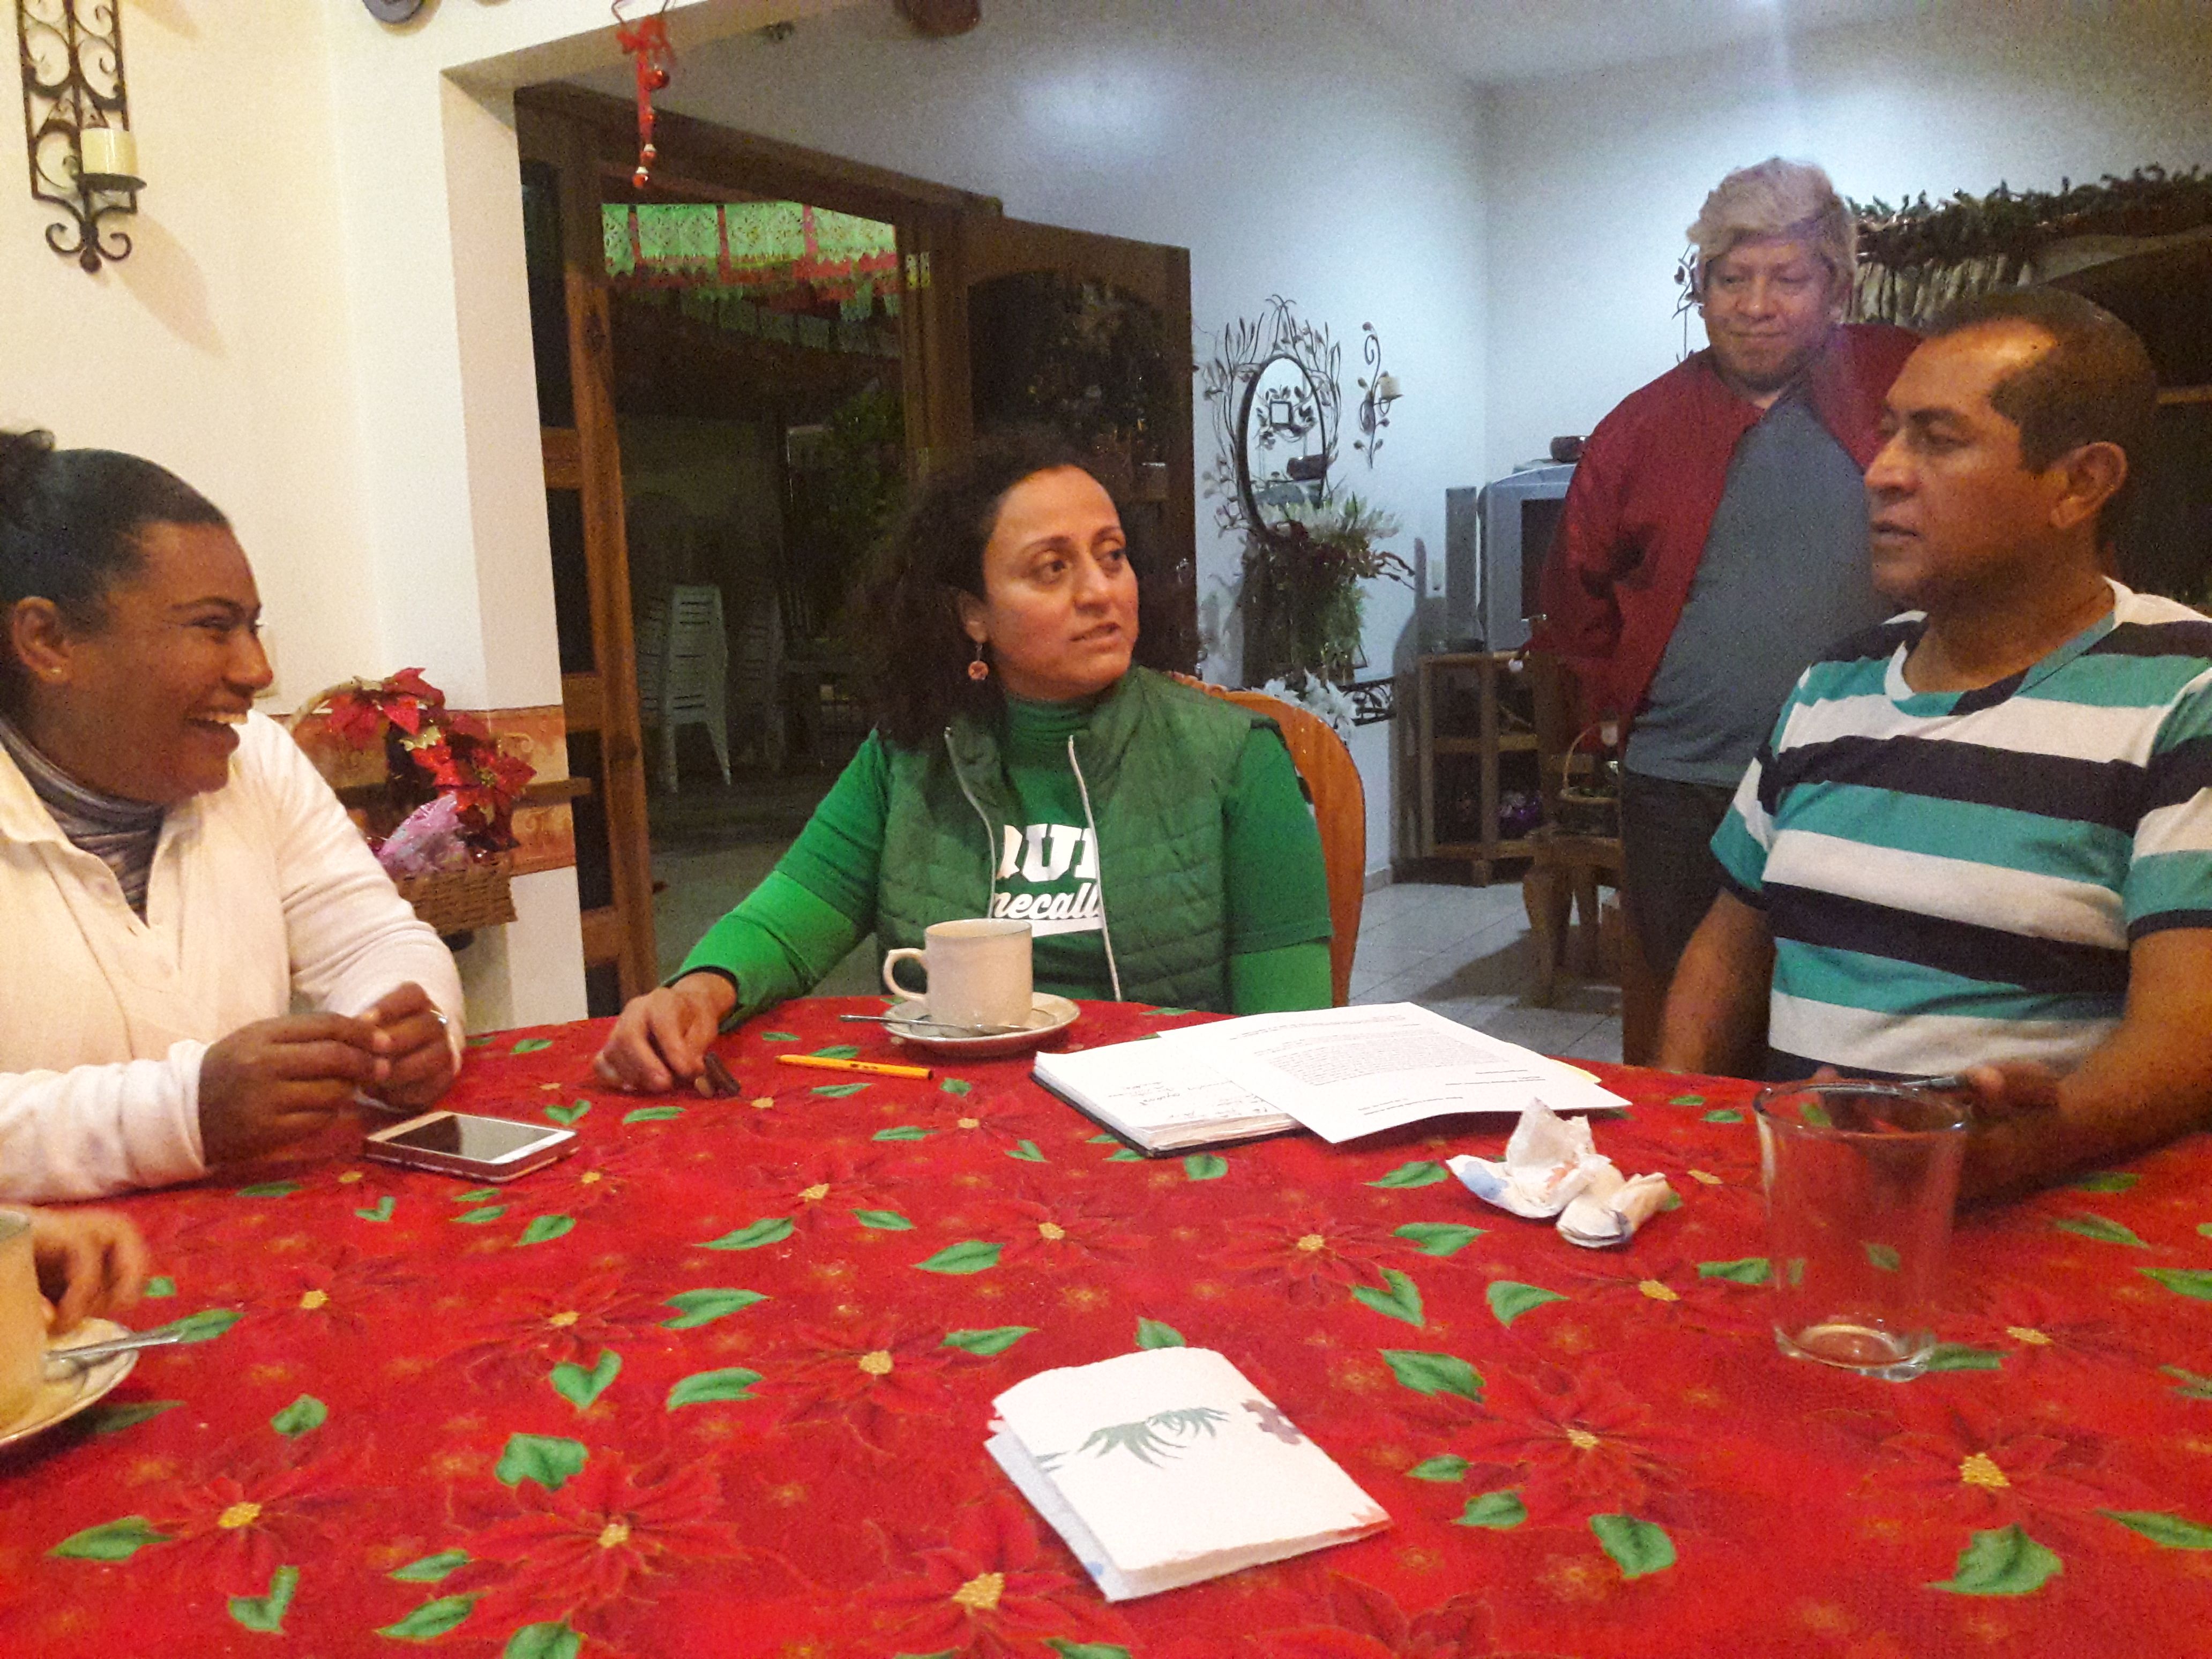 Laughs are shared in a discussion about an upcoming consultation forum, which successfully took place on Feb. 16, for the official recognition of Mata Clara as an Afro-Mexican town. Rosa María Hernández Fitta (center) is one of the forum’s main organizers. From Left to Right: Raquel Peña Virgen, Rosa María Fitta Hernández, Edgar Merino, Efrain Blanco Vera. Image by Jonathan Custodio. Mexico, 2018.